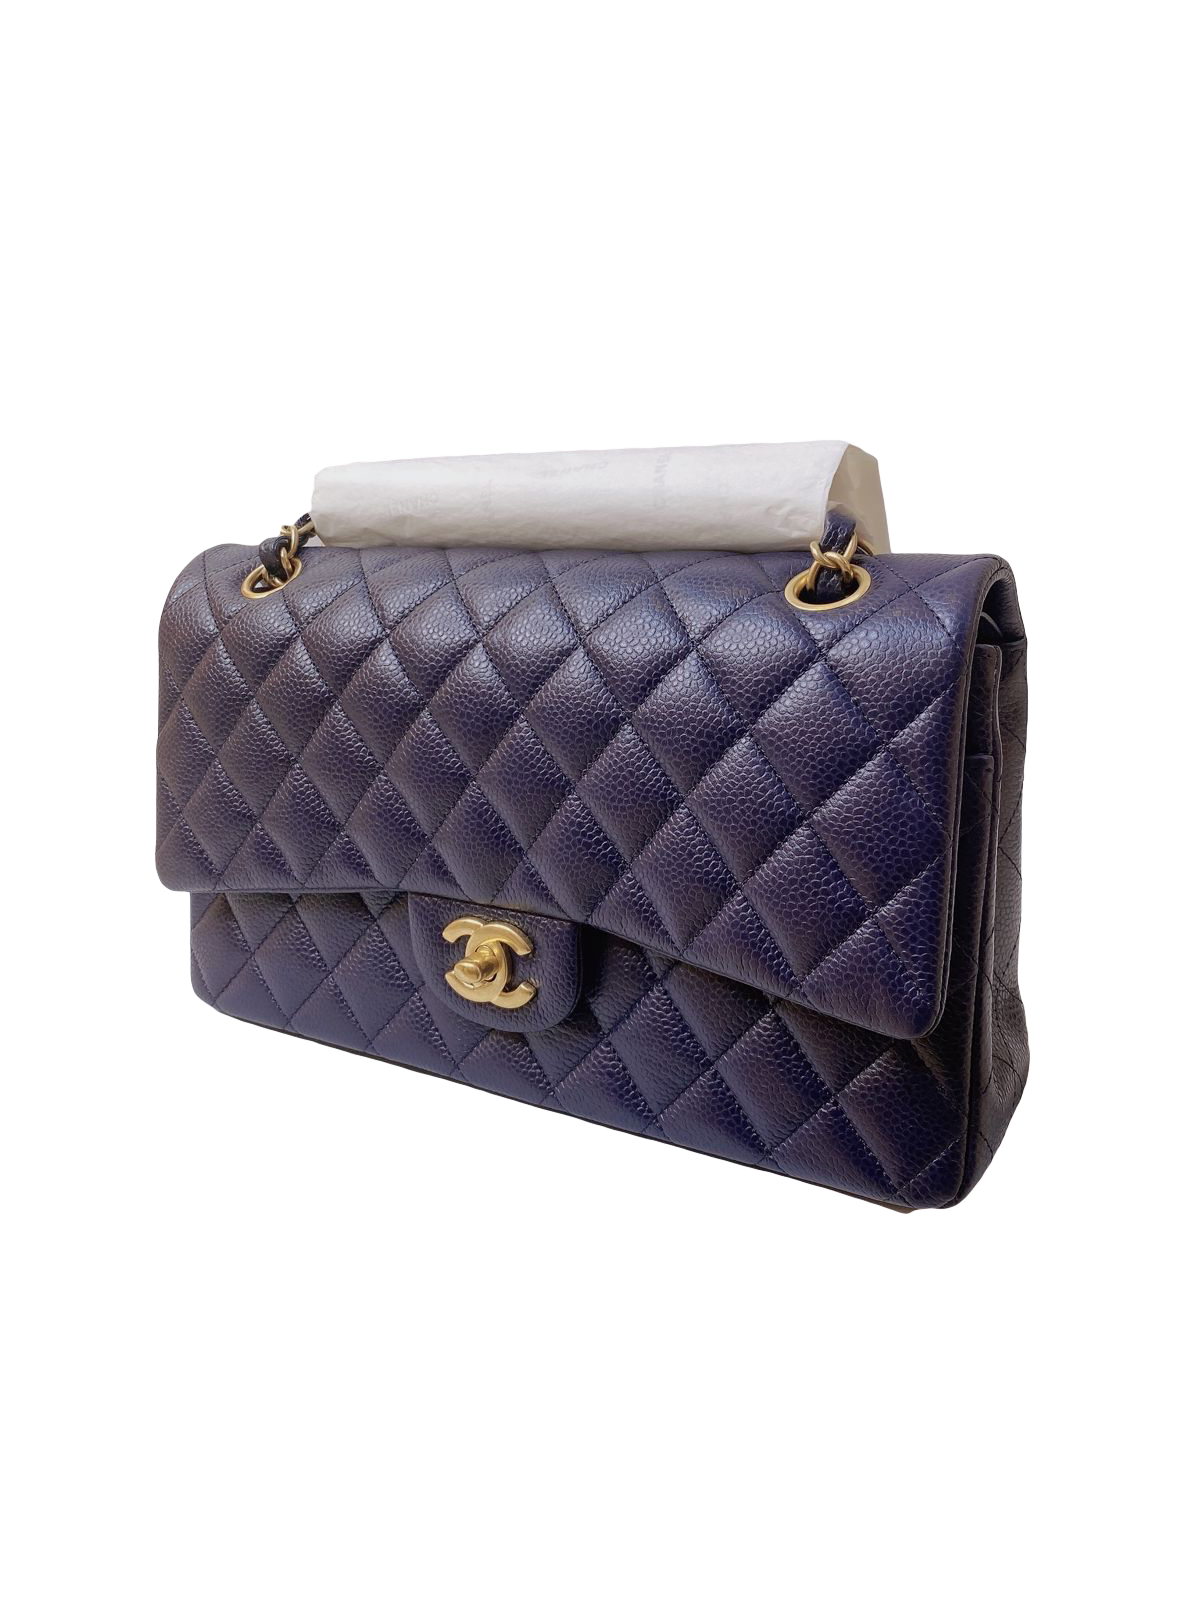 CHANEL NAVY BLUE CAVIAR QUILTED LEATHER CLASSIC MEDIUM DOUBLE FLAP BAG GHW  - styleforless